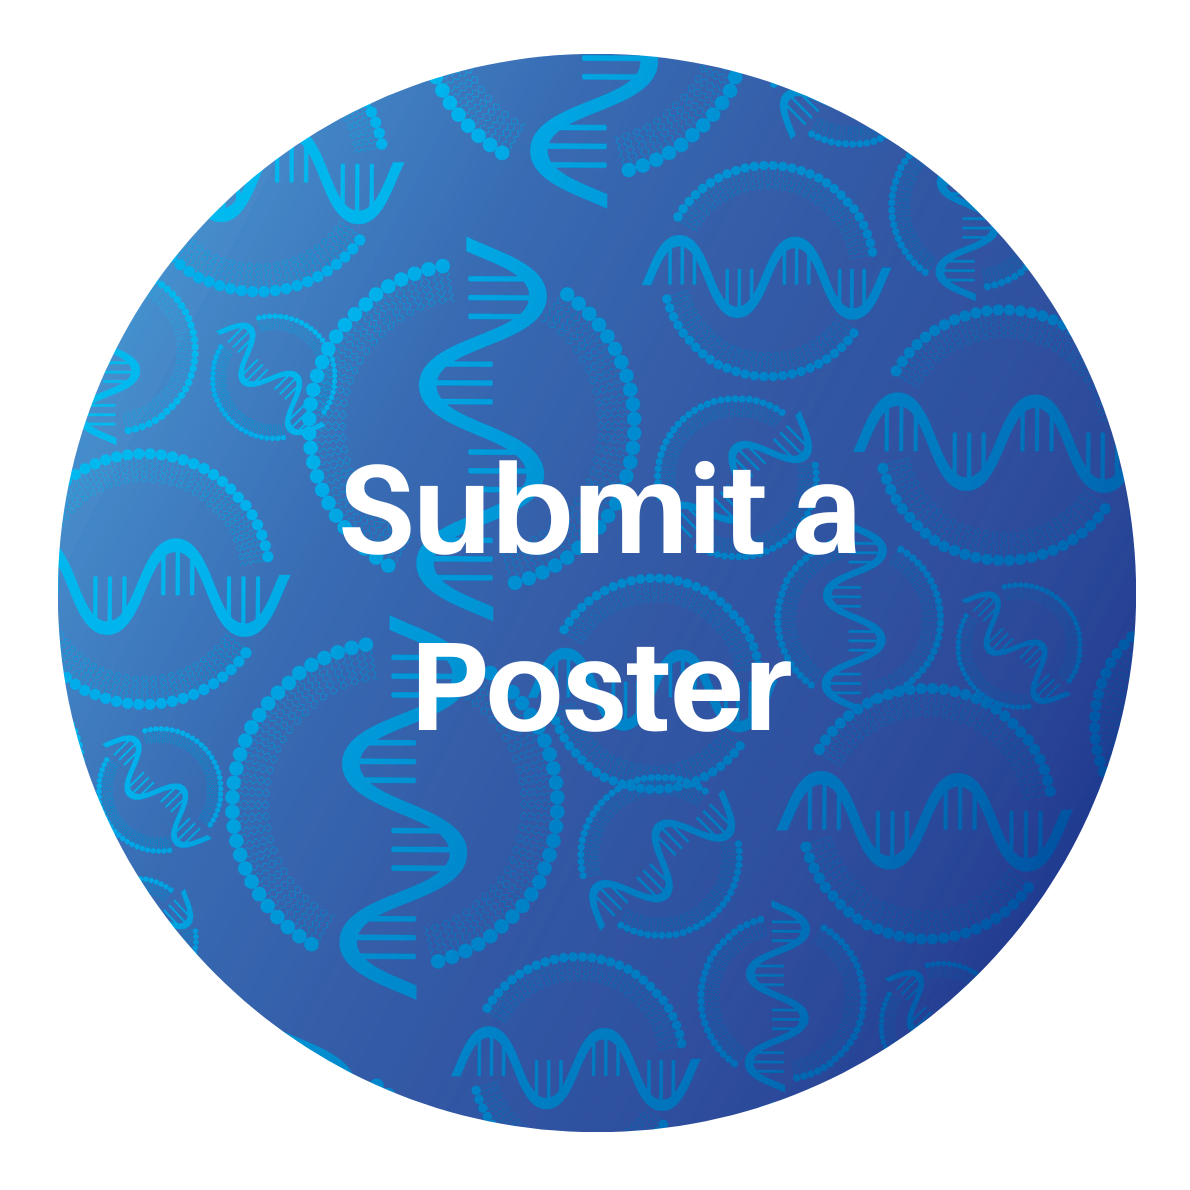 Submit a poster